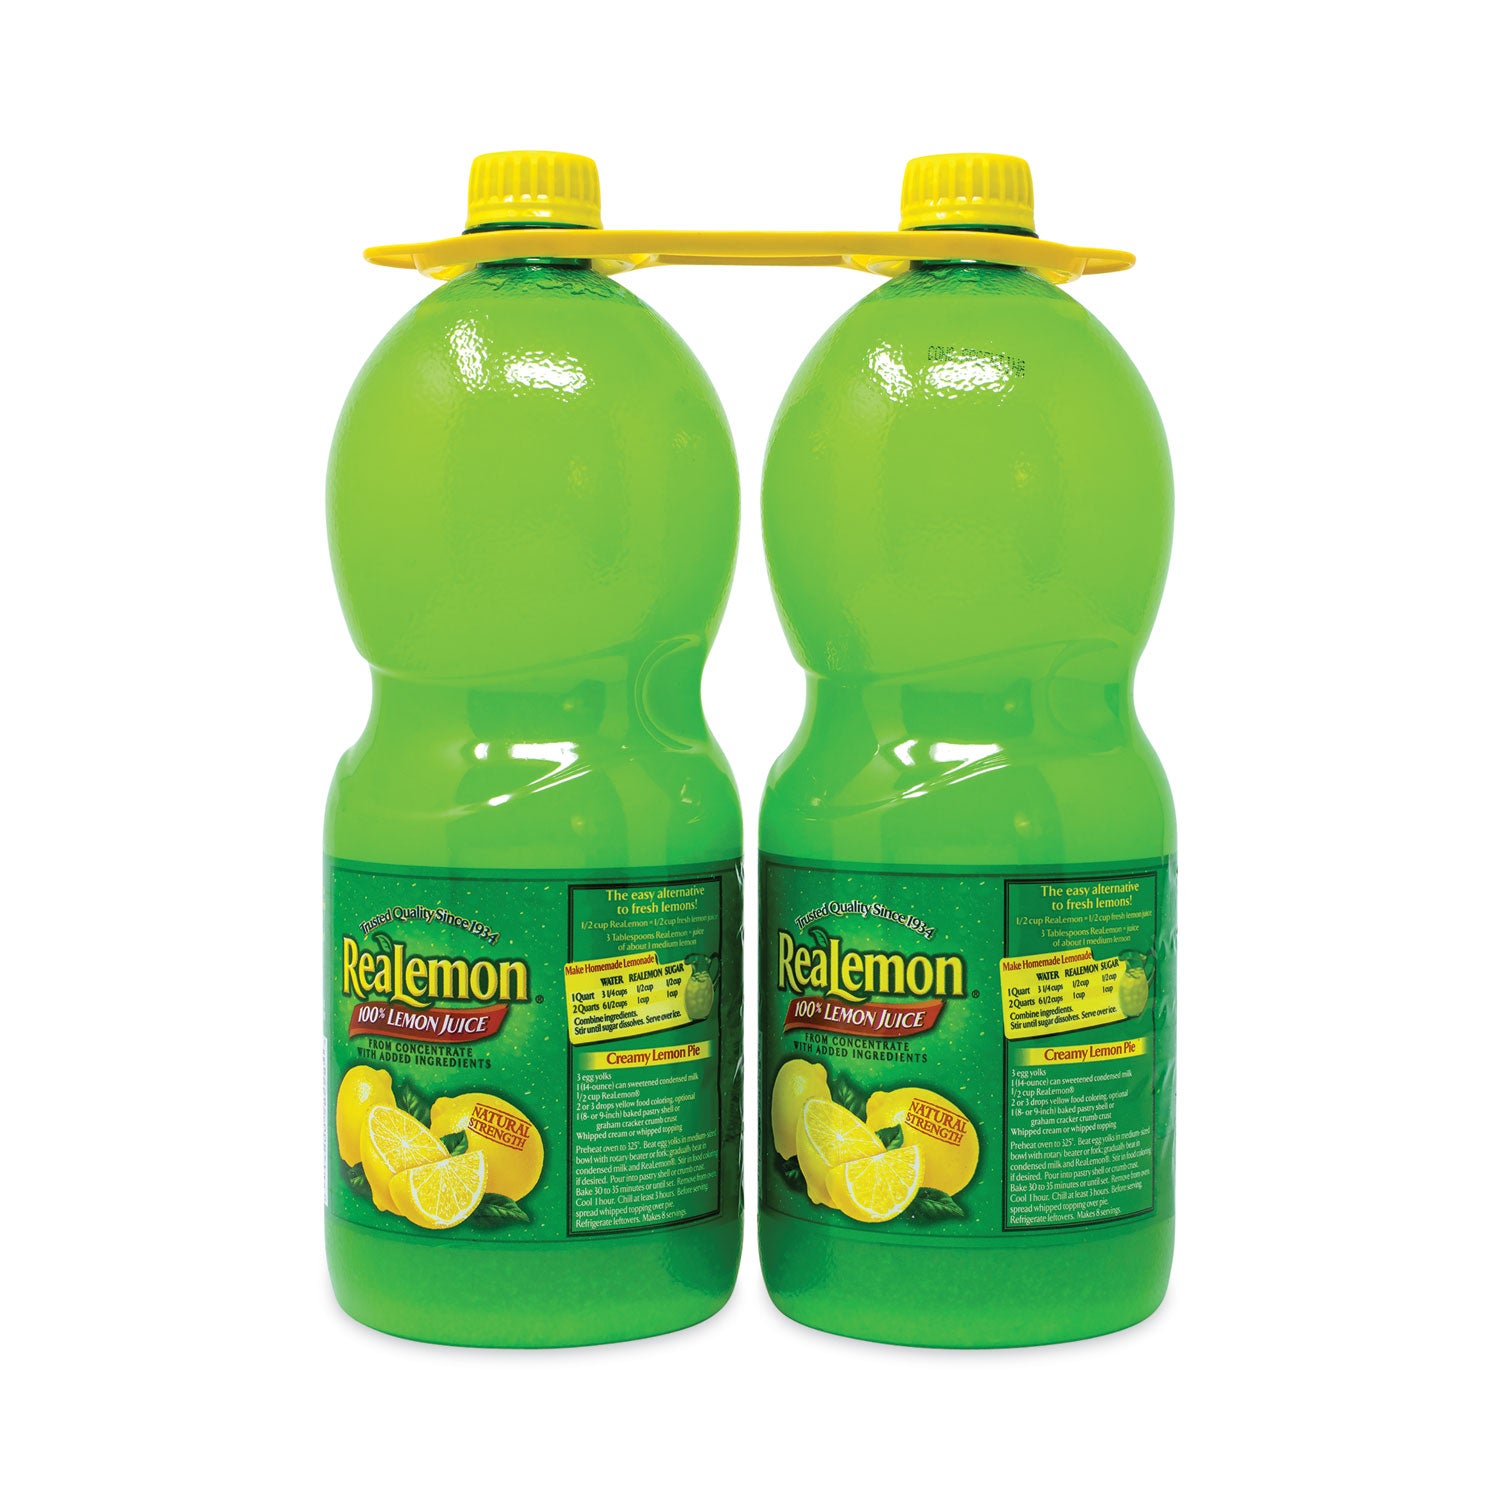 100%-lemon-juice-from-concentrate-48-oz-bottle-2-carton-ships-in-1-3-business-days_grr22000913 - 2